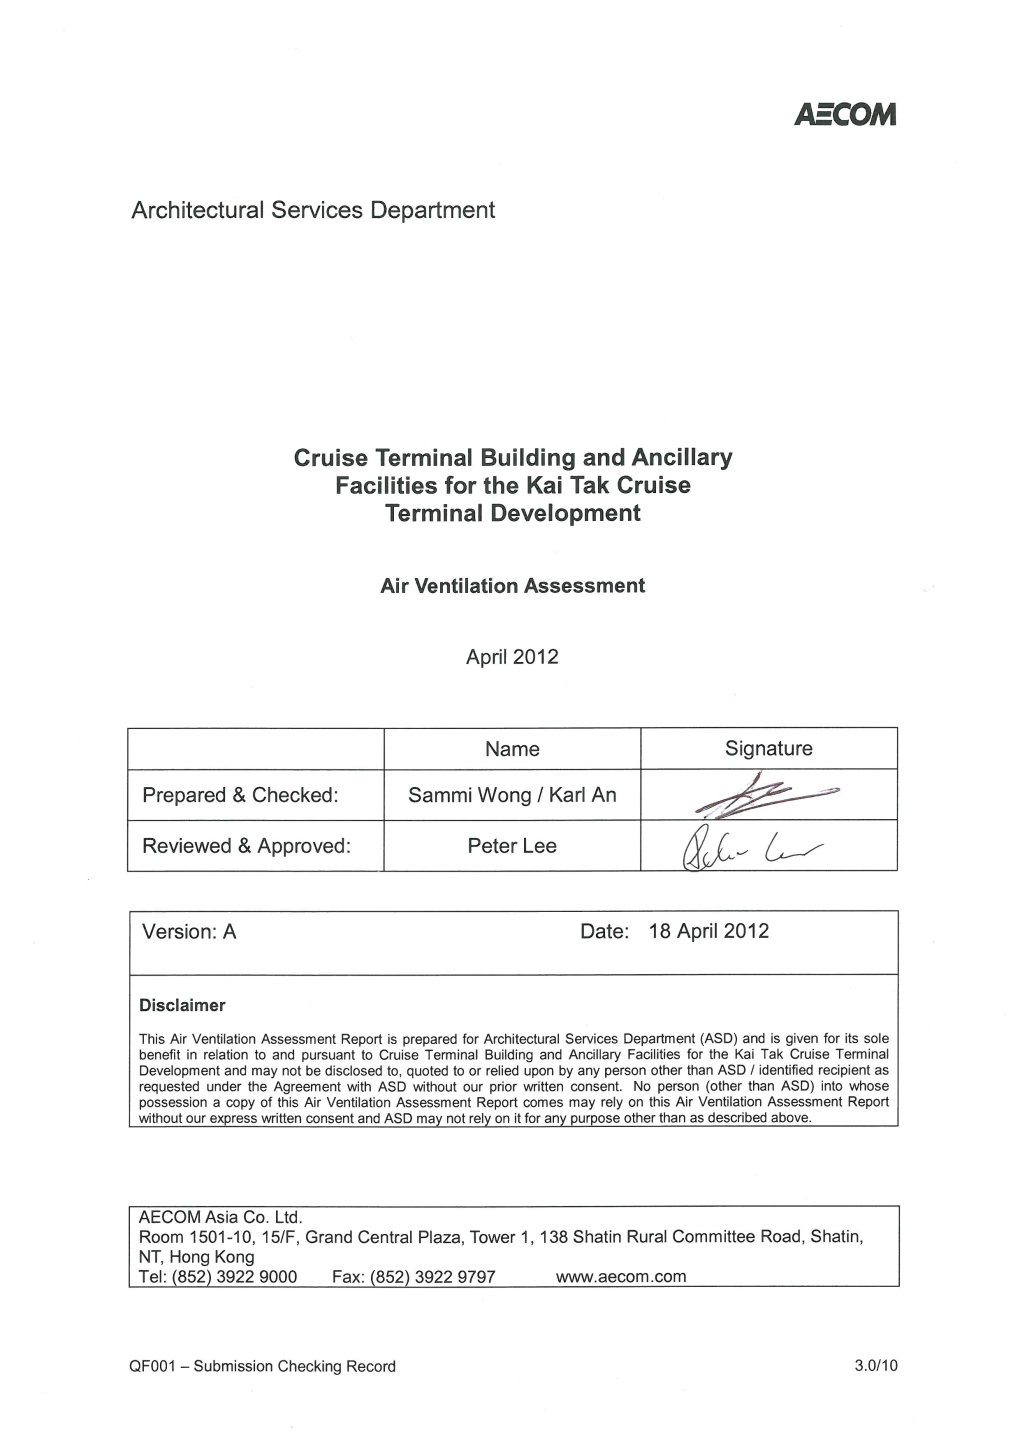 Final Report (2005) and Technical Guide for Air Ventilation Assessment for Developments in Hong Kong (2006)